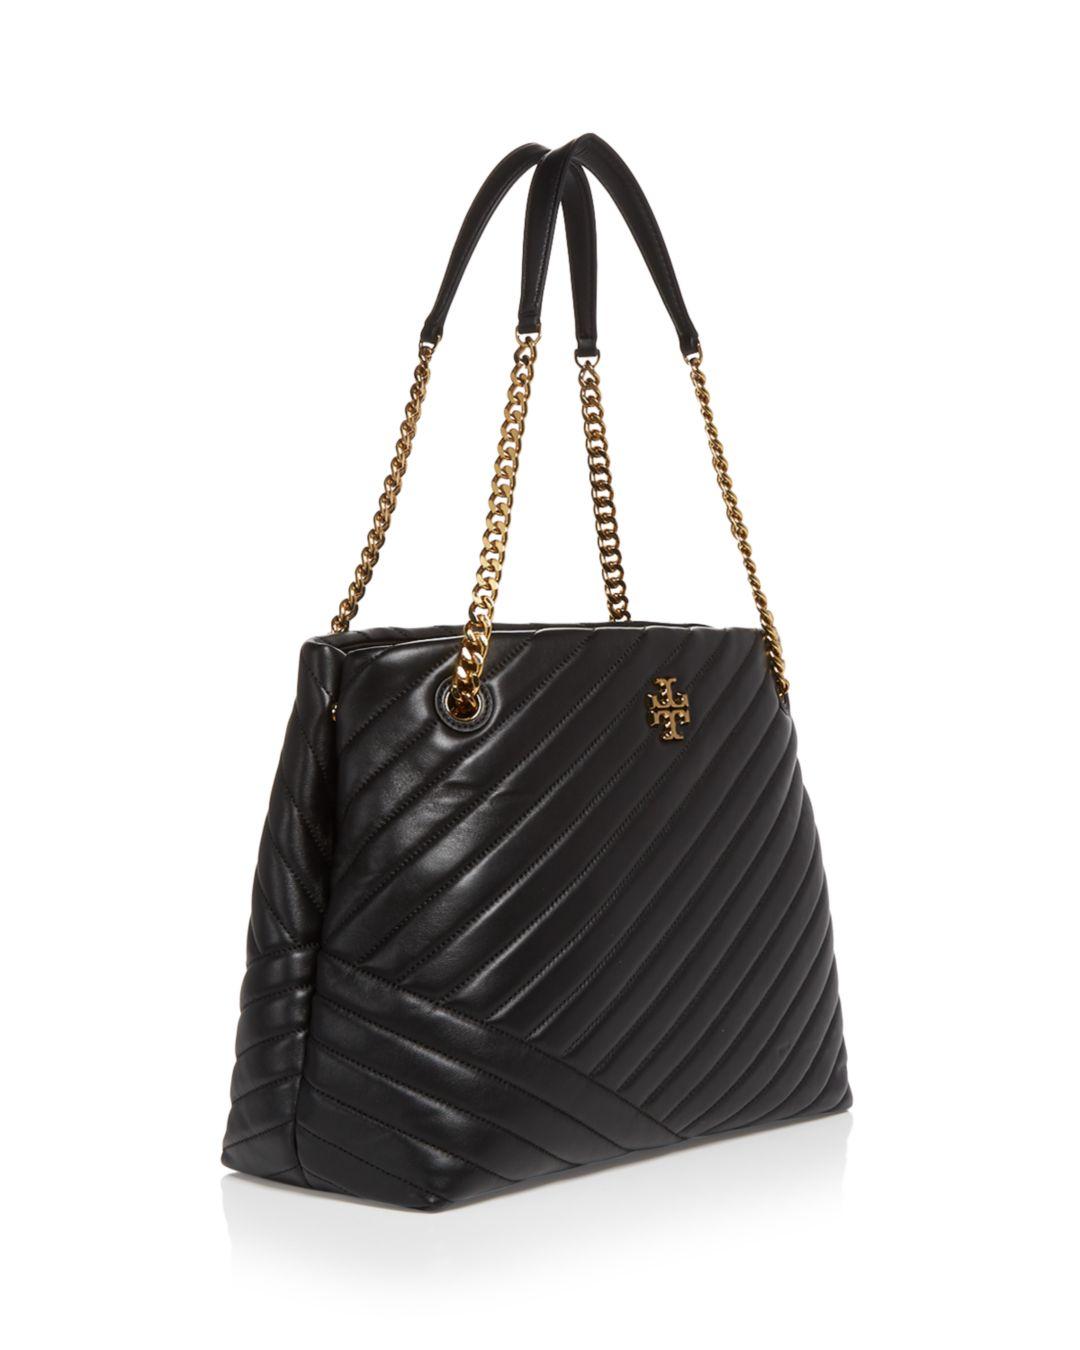 Tory Burch Leather Kira Chevron Tote in Black/Gold (Gray) | Lyst